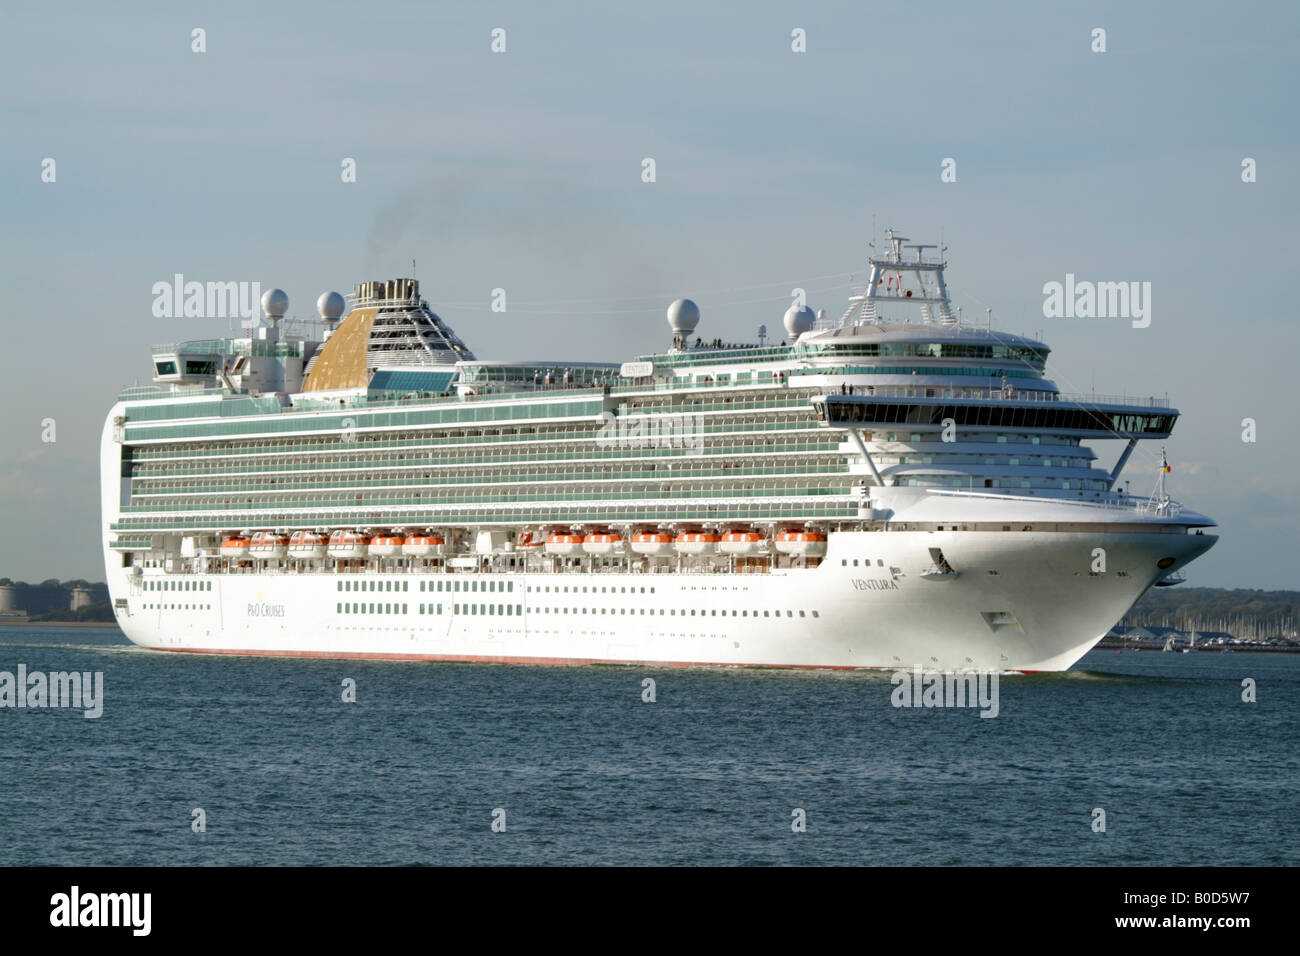 P O cruiseliner ship Ventura launched in April 2008 Southampton Water England UK Stock Photo